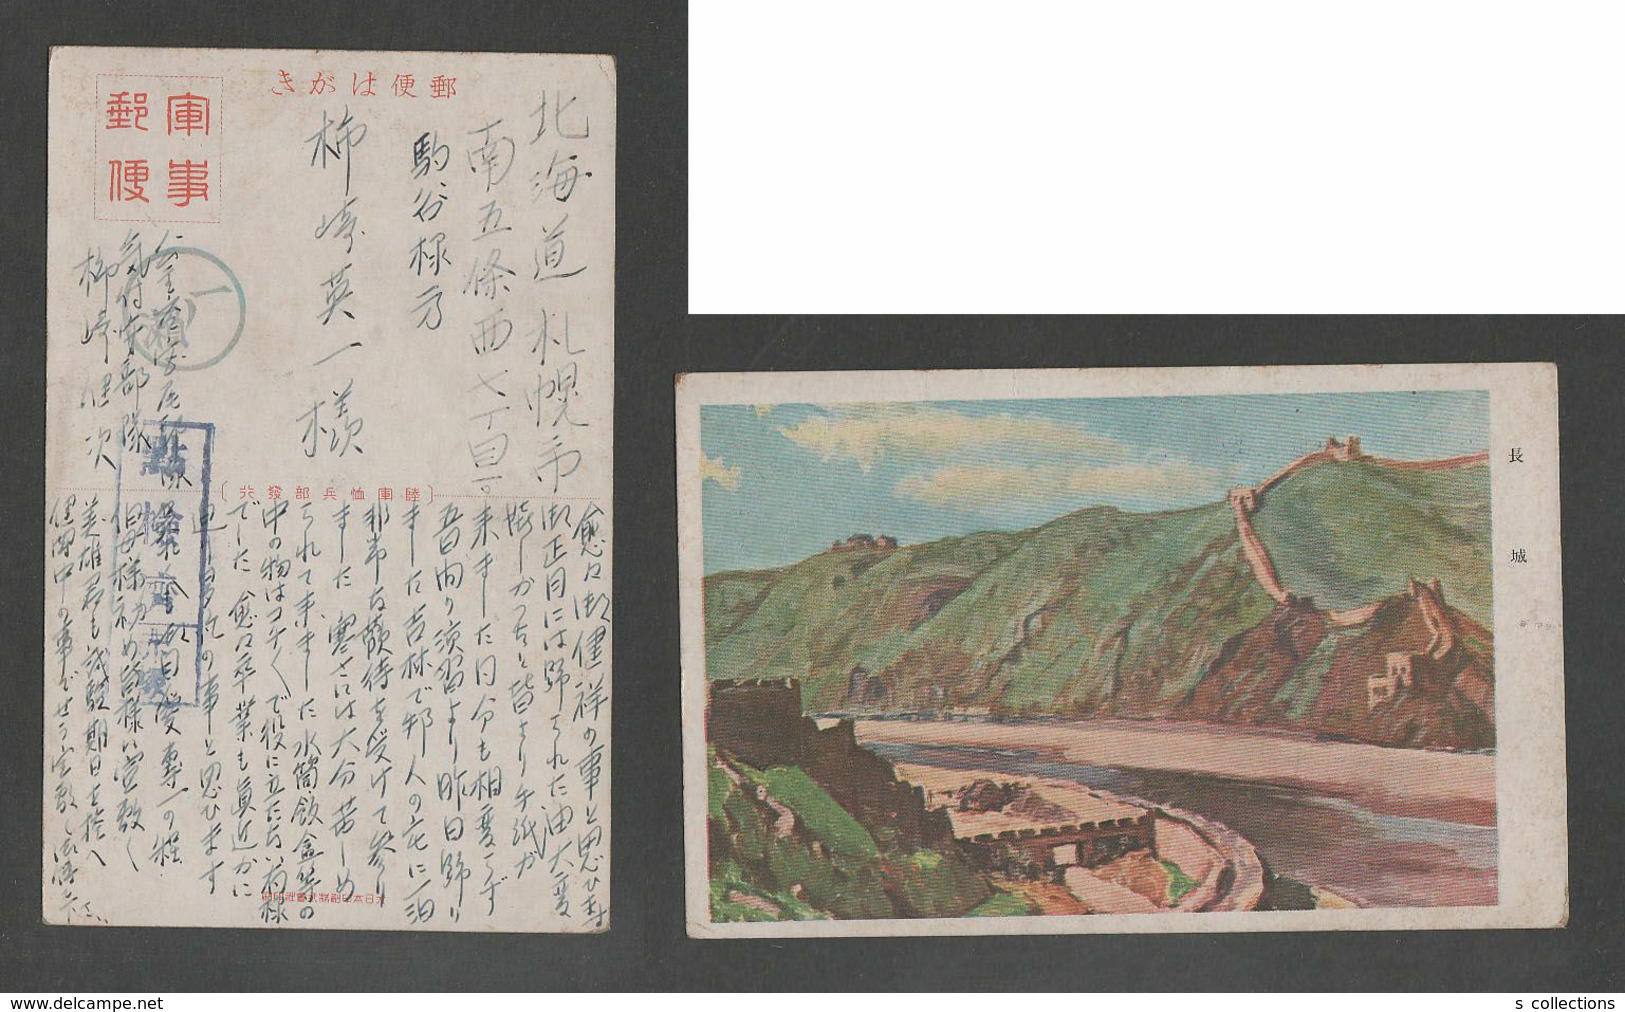 JAPAN WWII Military Great Wall Of China Picture Postcard MANCHUKUO CHINA WW2 MANCHURIA CHINE MANDCHOUKOUO JAPON GIAPPONE - 1943-45 Shanghai & Nanjing